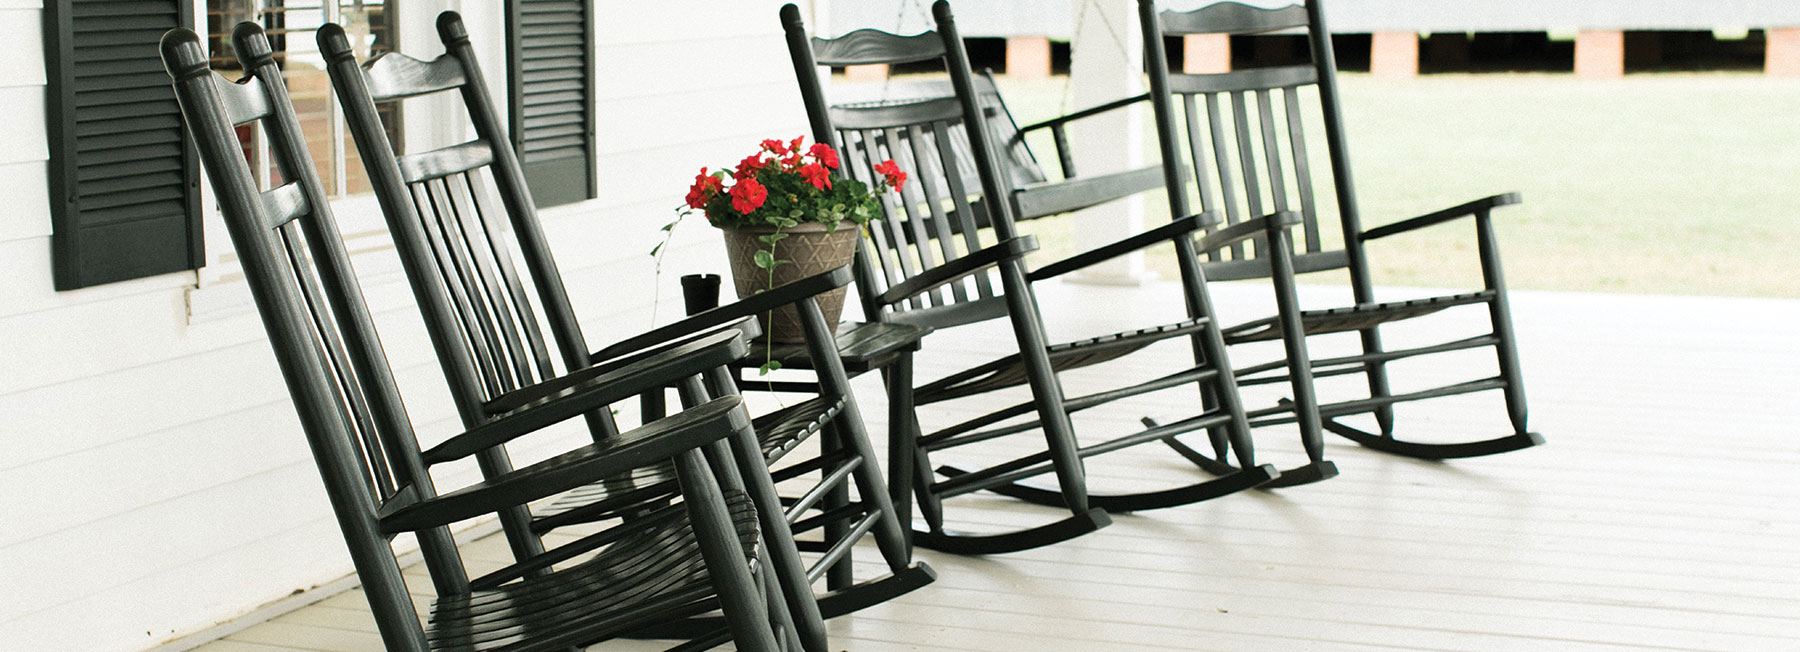 Rocking Chairs on Porch - The Peach Pelican